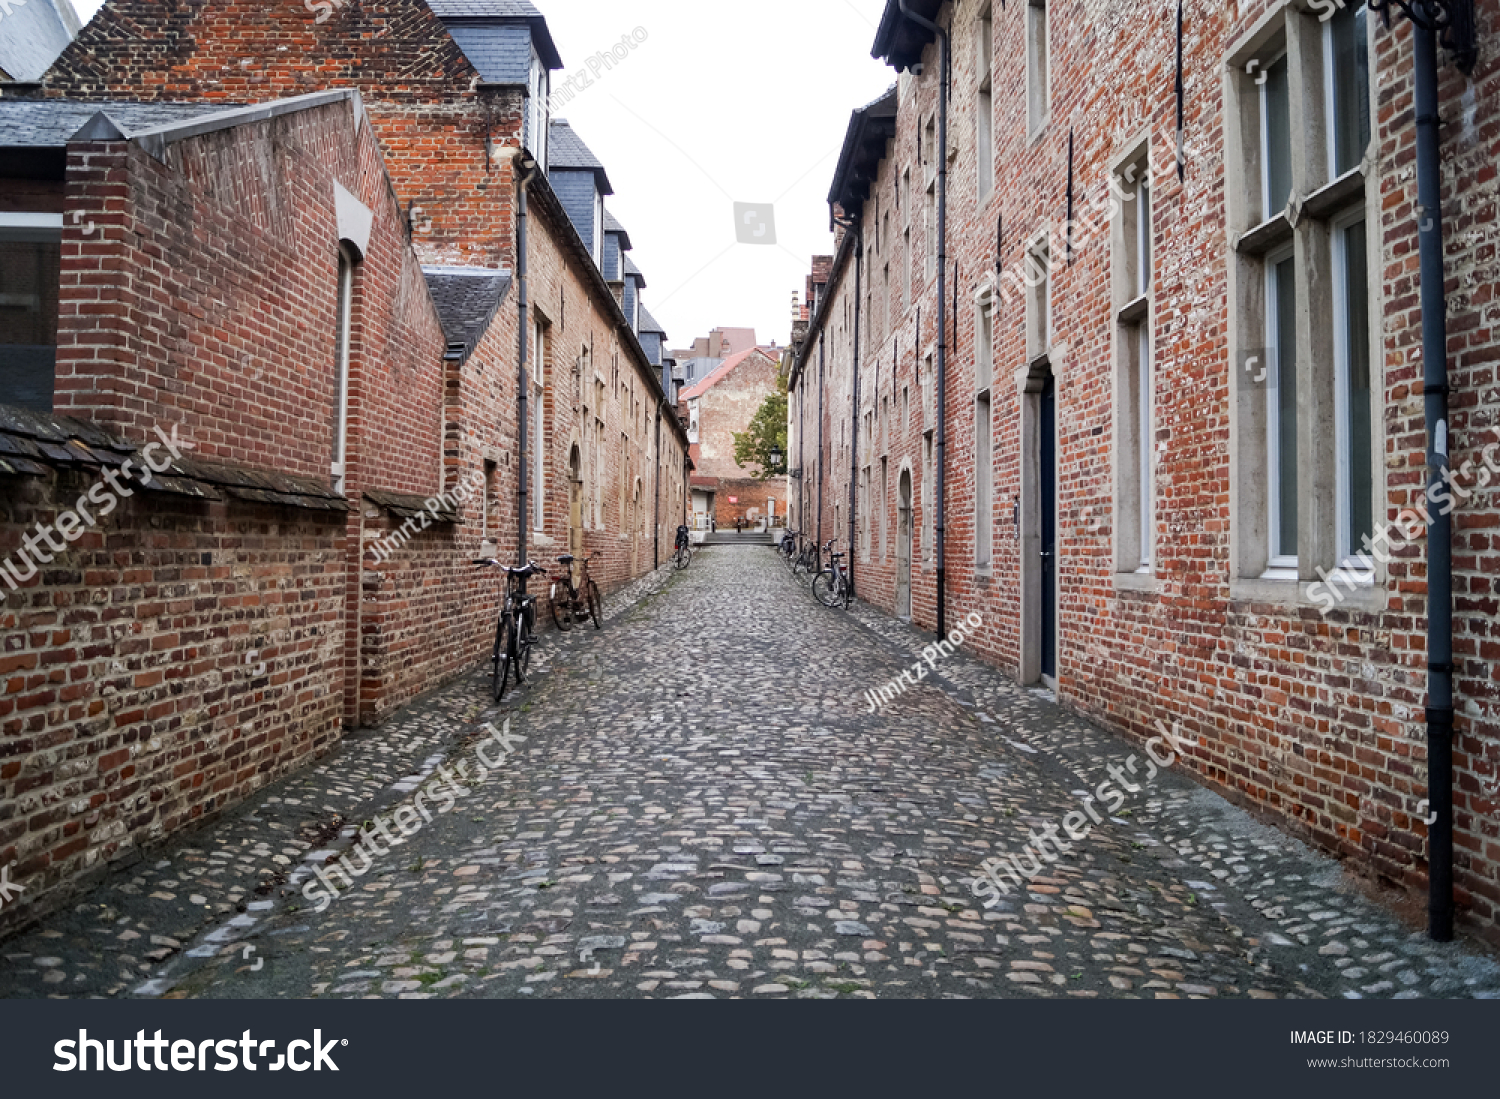 736 One point perspective street Images, Stock Photos & Vectors ...